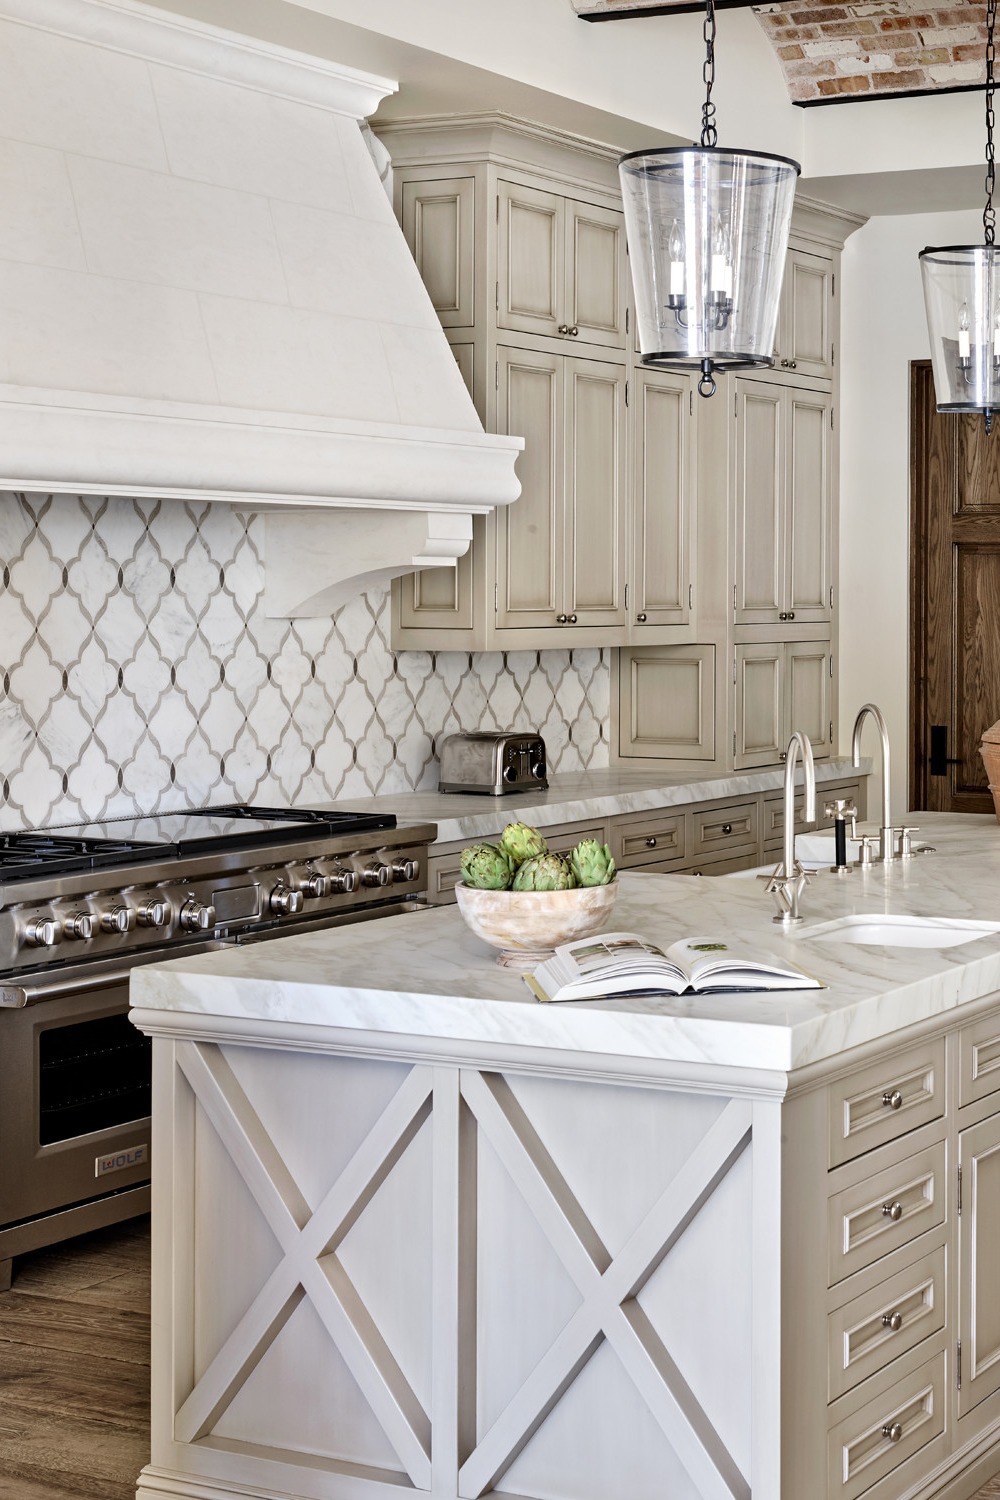 White Arabesque Pattern Gray Cabinets Style Wood Floor Appliances Look